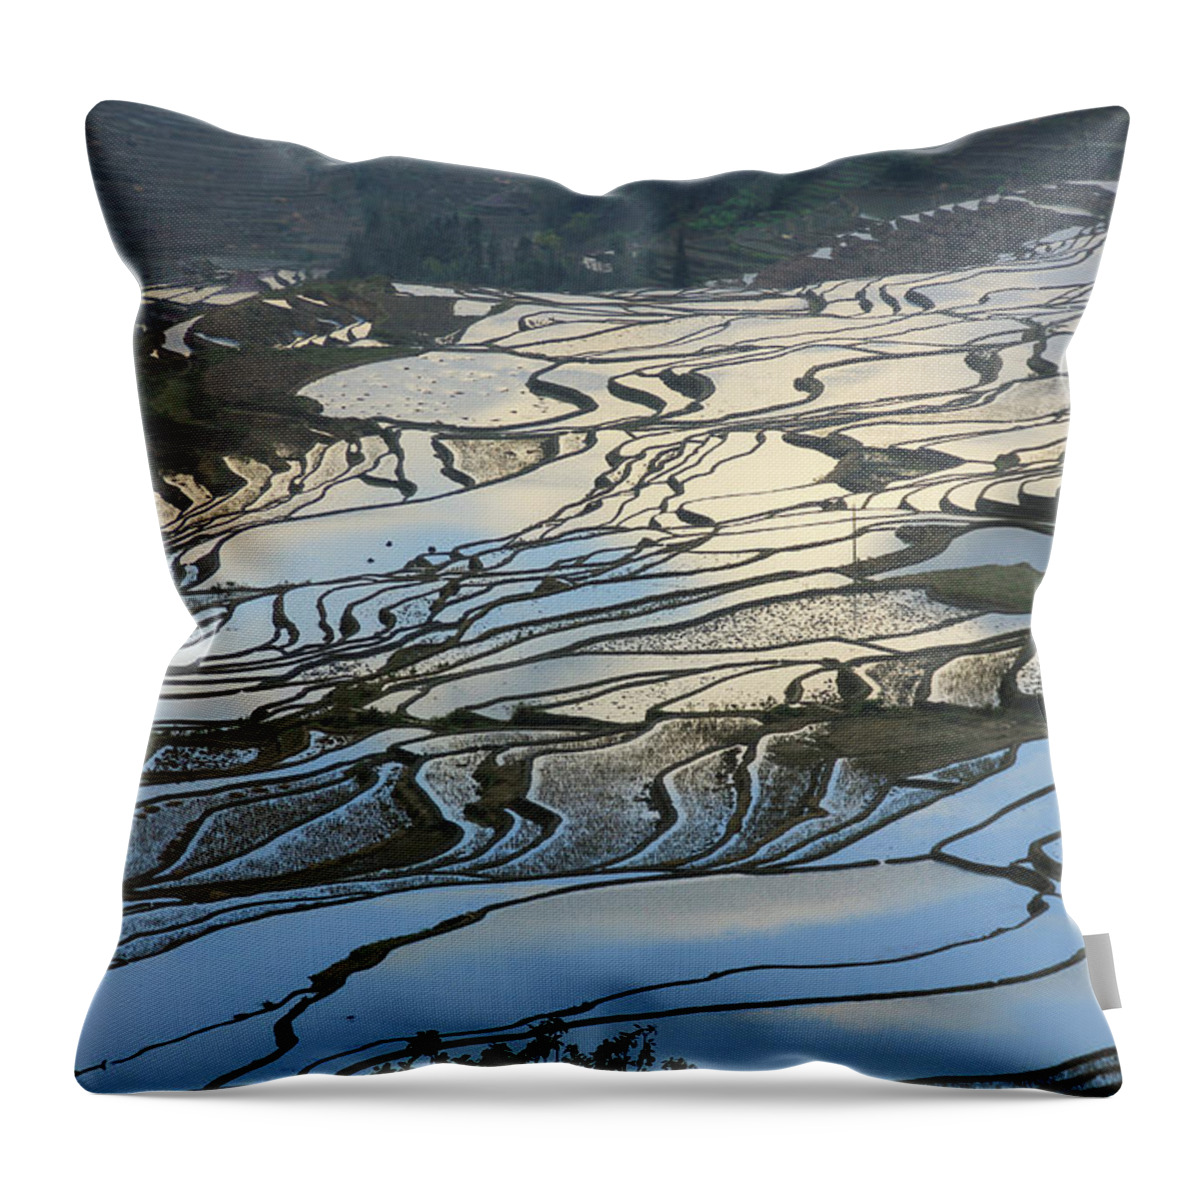 Yuanyang Throw Pillow featuring the photograph Rice terraces Chinese Restaurant Decoration by Josu Ozkaritz